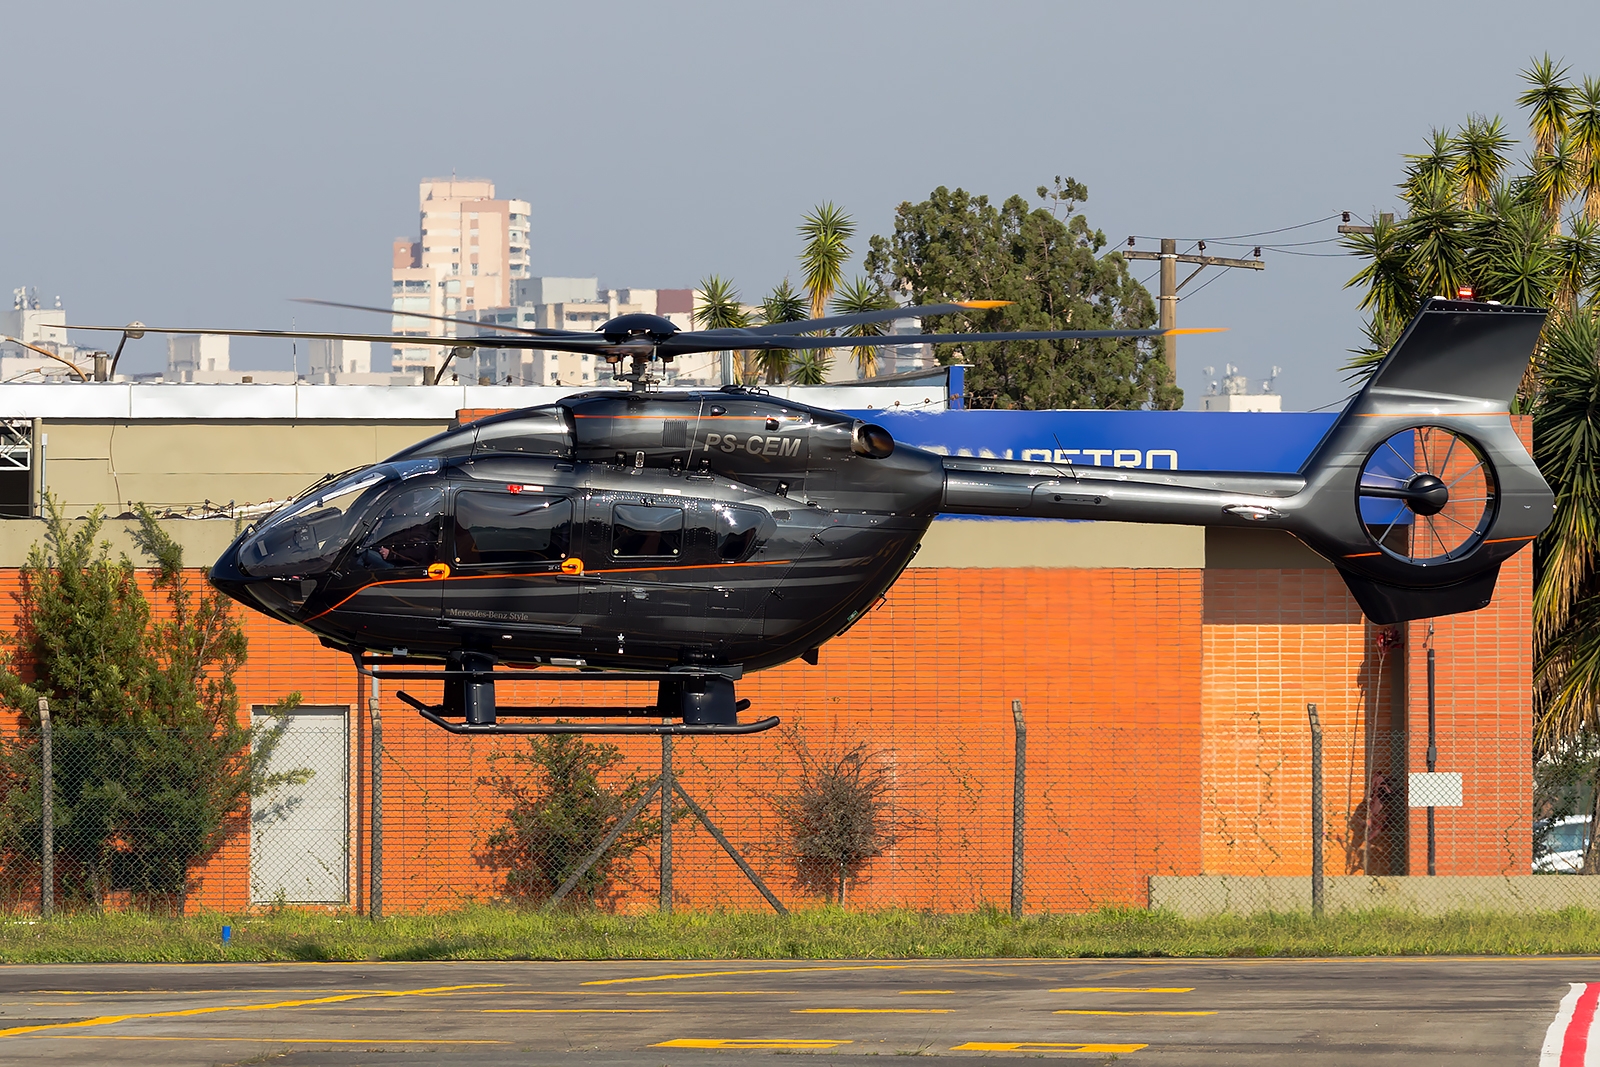 PS-CEM - Airbus Helicopters H145